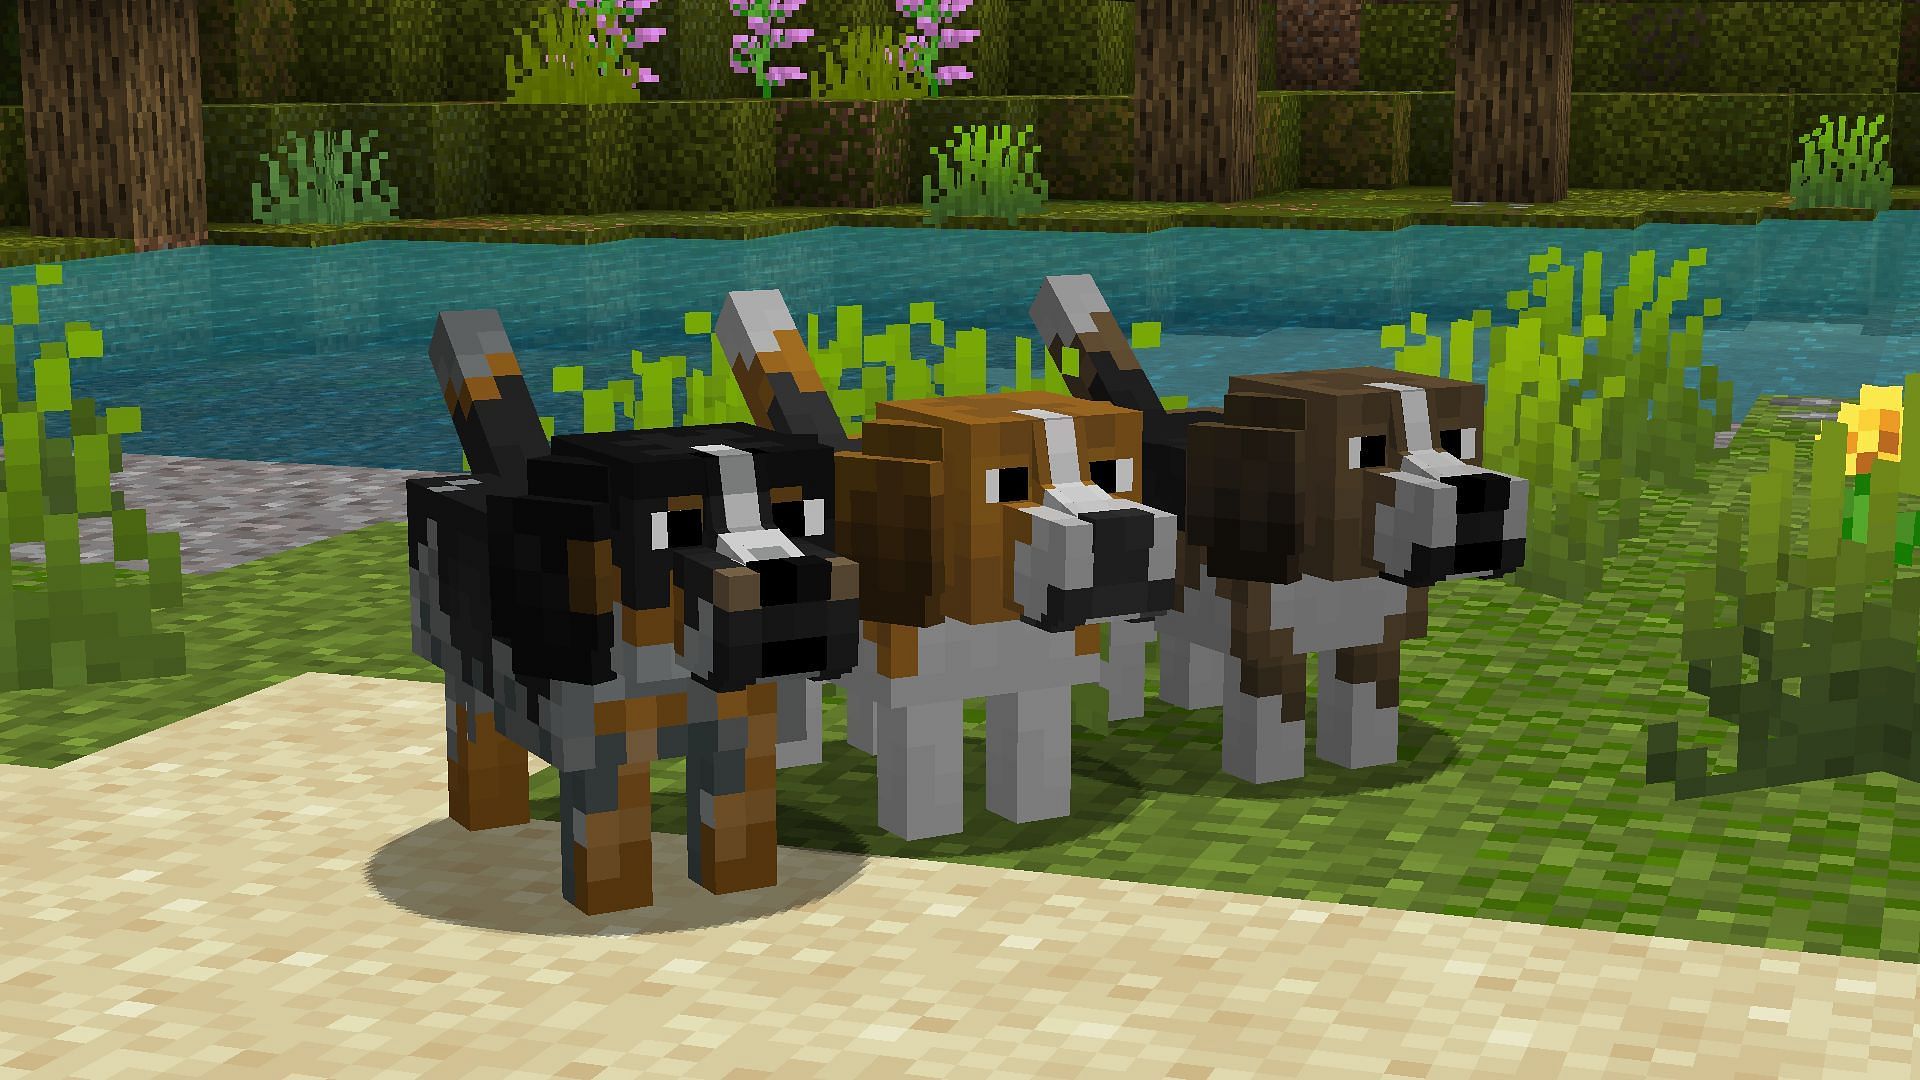 Wolves can completely change into different dog breeds in Minecraft 1.19.2 (Image via CurseForge)